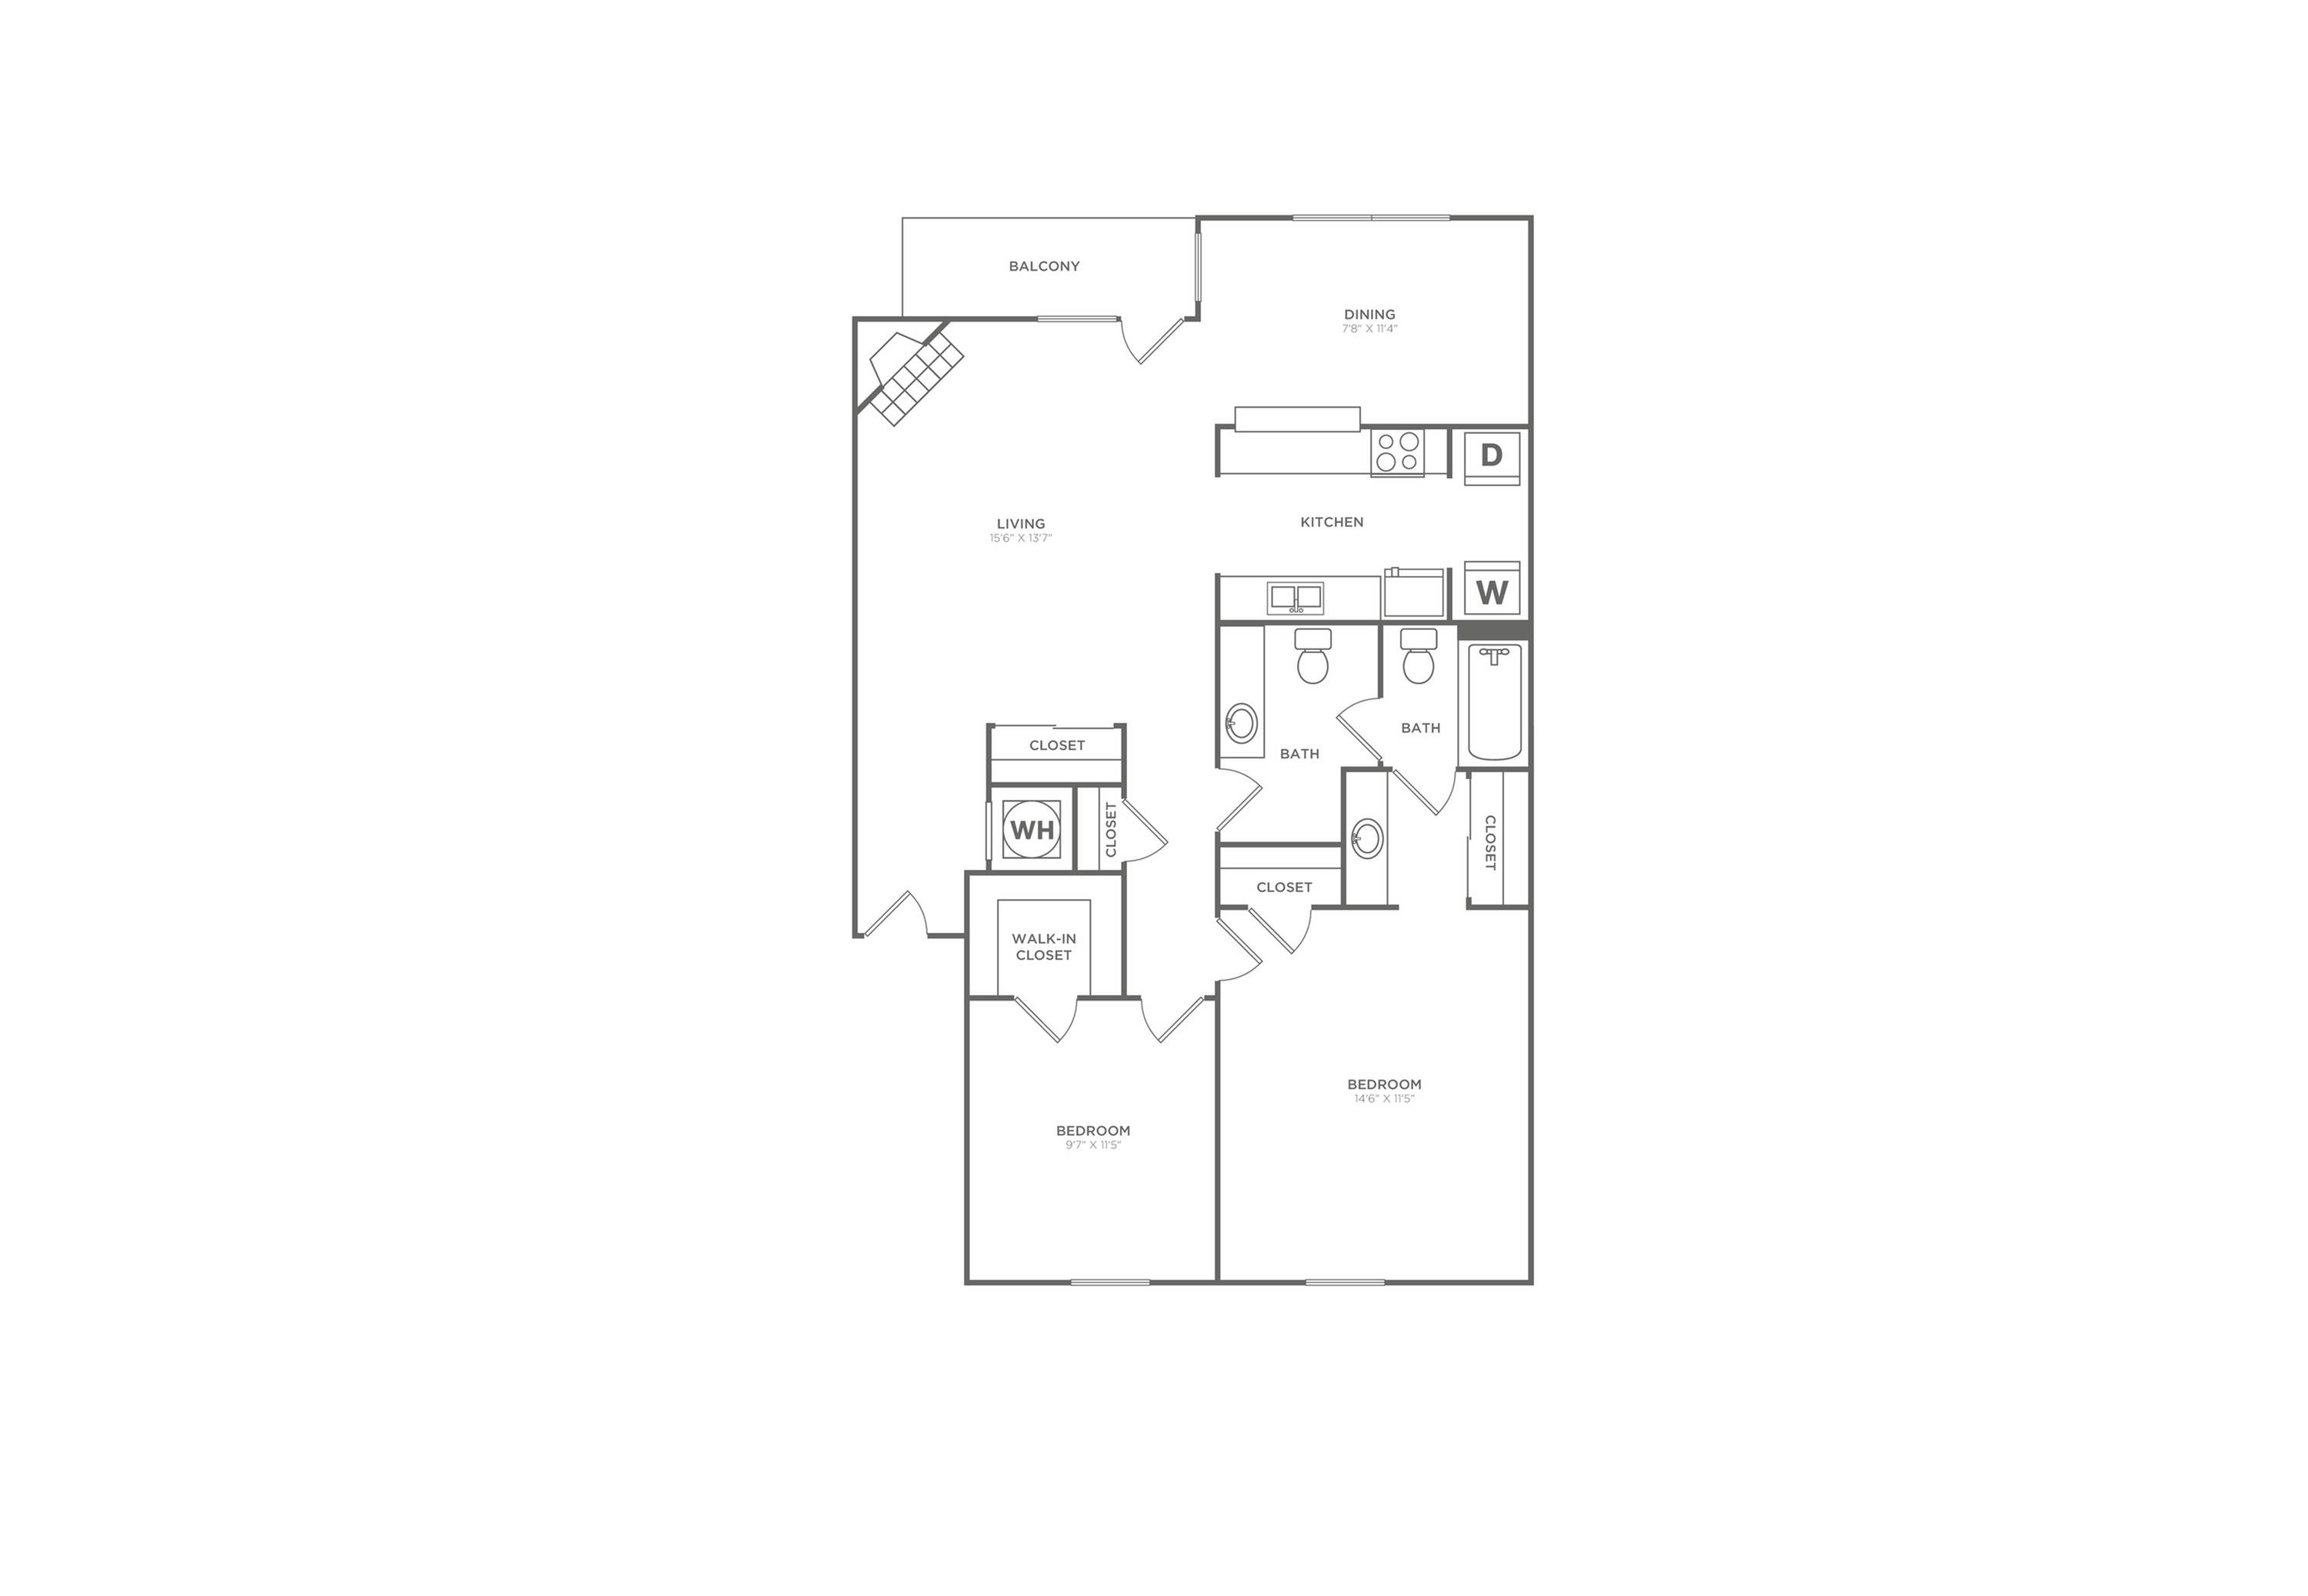 British Oak | 2 bed 1.5 bath | 989 sq ft | Floor Plan map for a two bedroom unit at our apartments for rent in  Nashville, TN, featuring labeled rooms with dimensions.